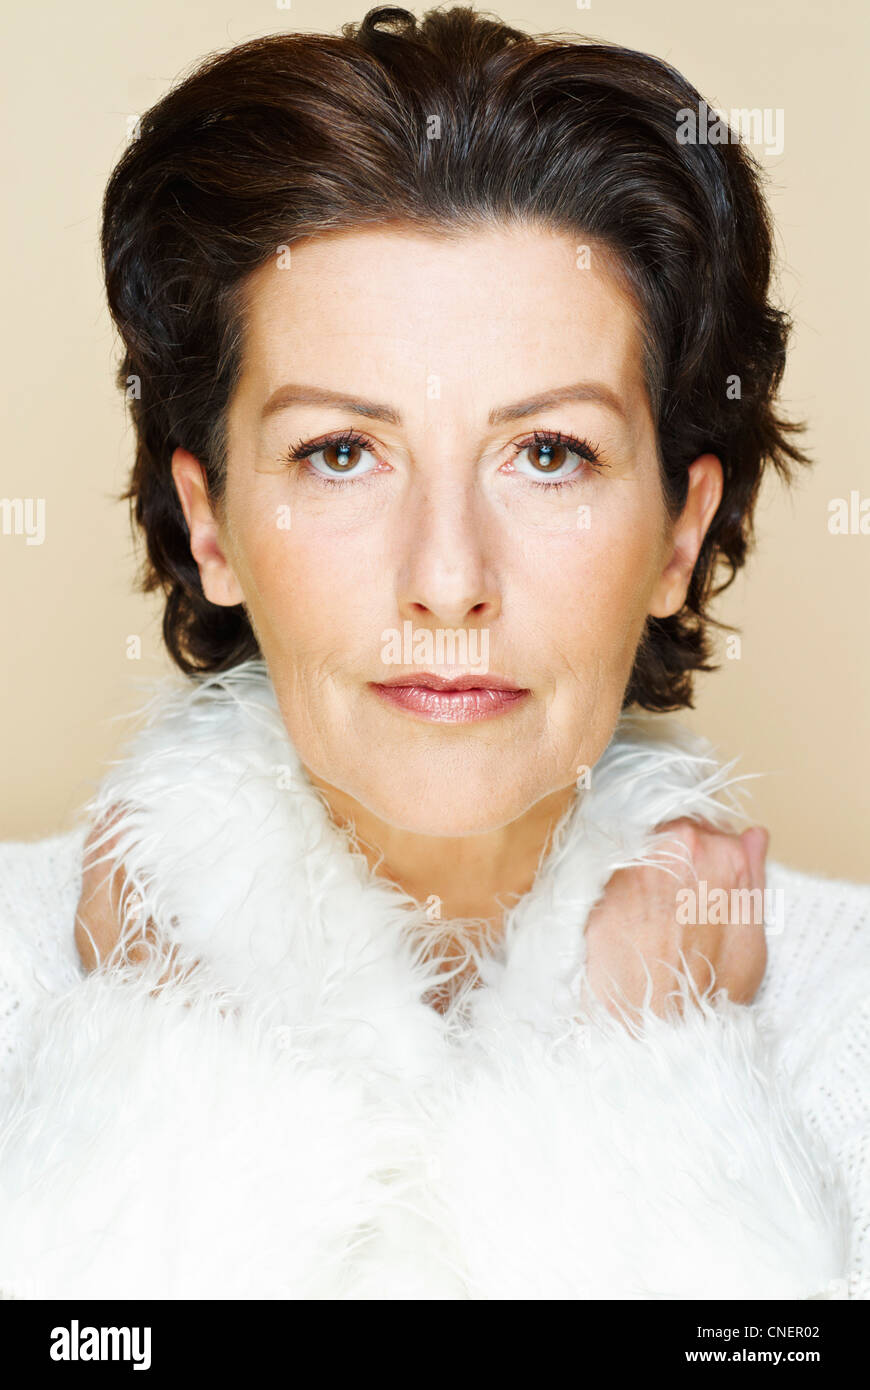 portrait of elegant dark-haired woman in her forties Stock Photo